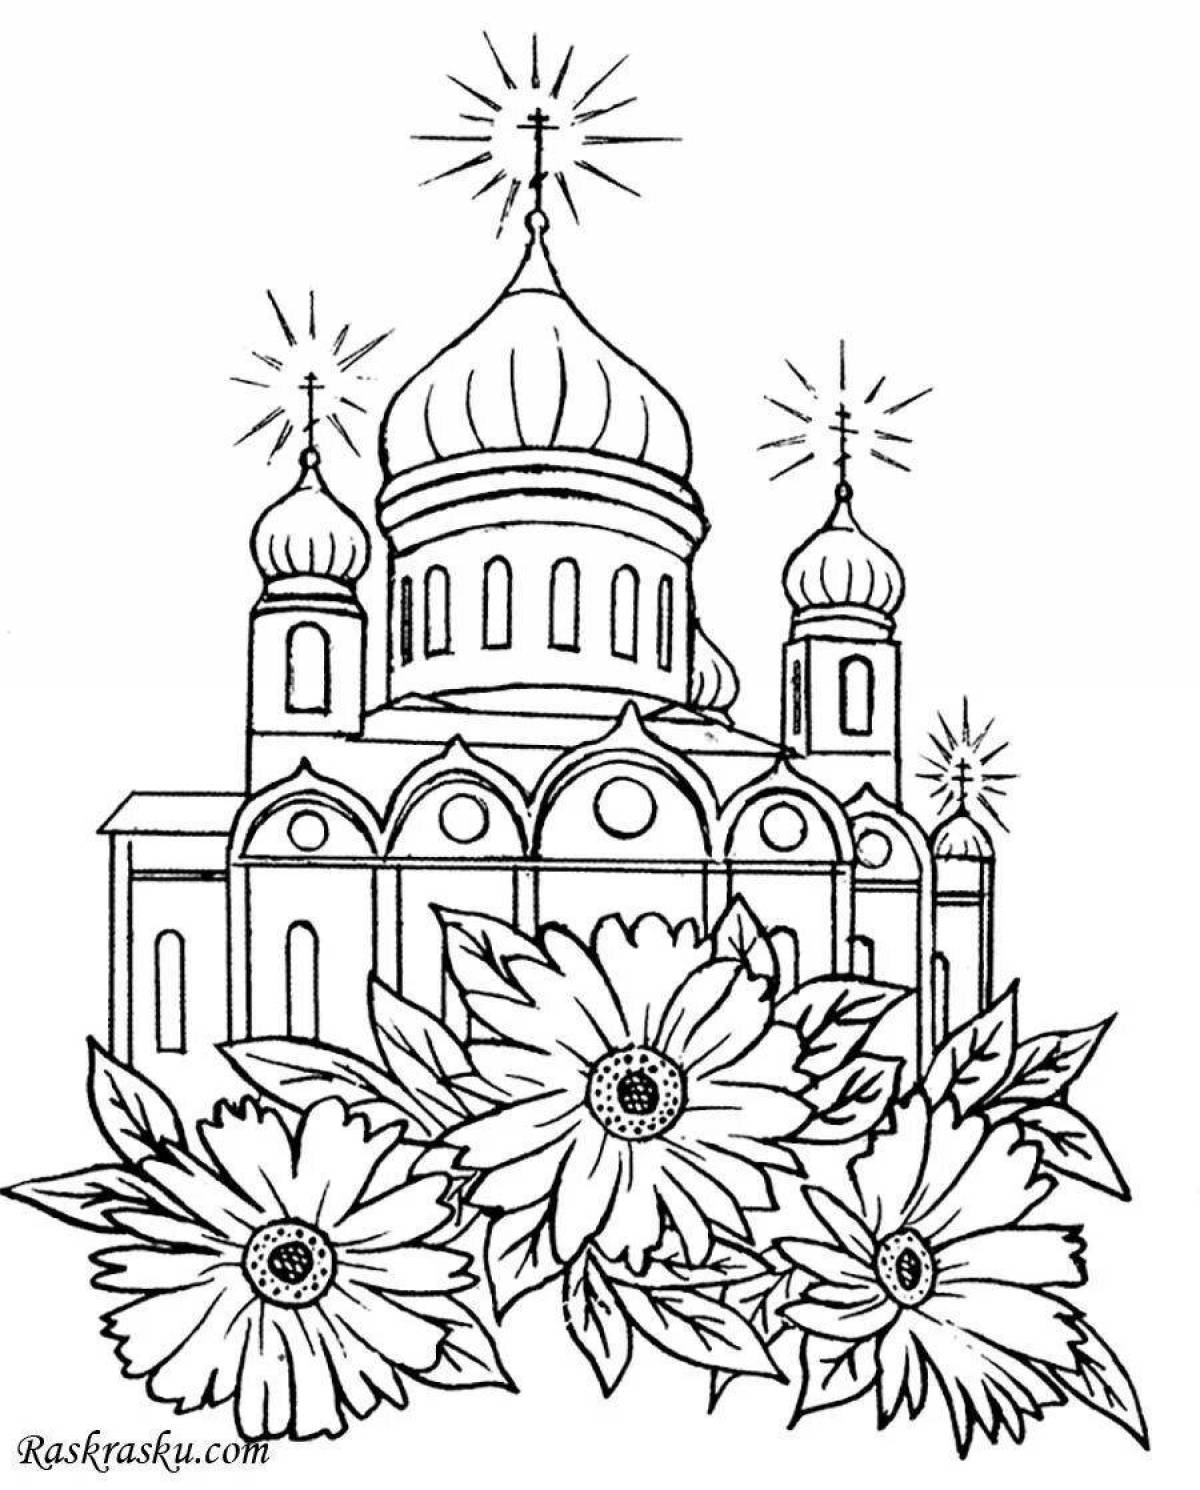 Awesome cathedral coloring page